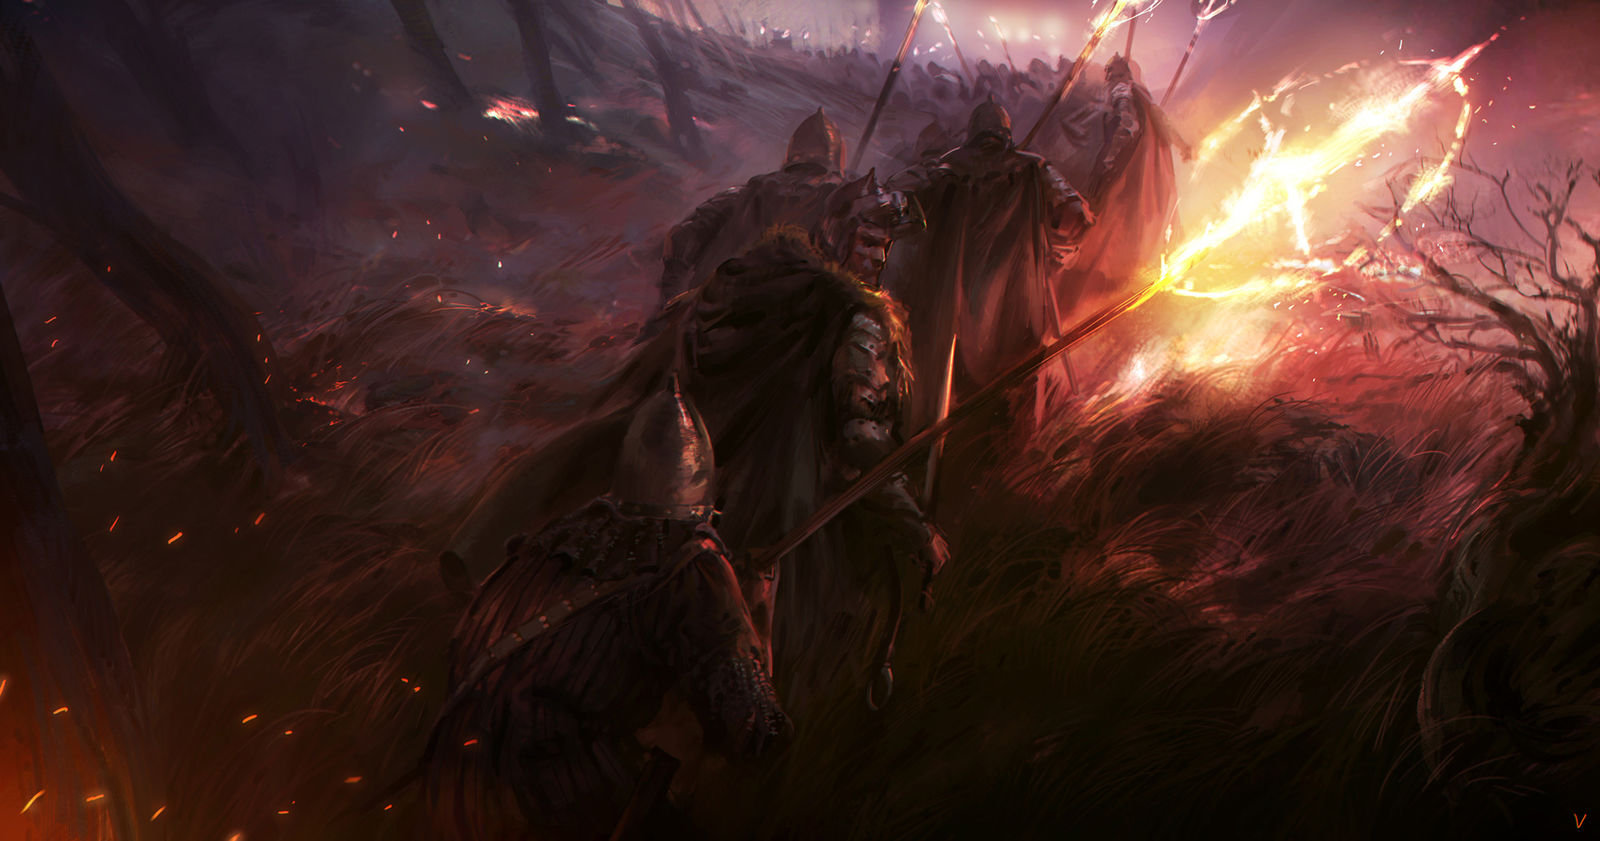 Victor Cloux Digital Painting Illustration Knight Fire Attack